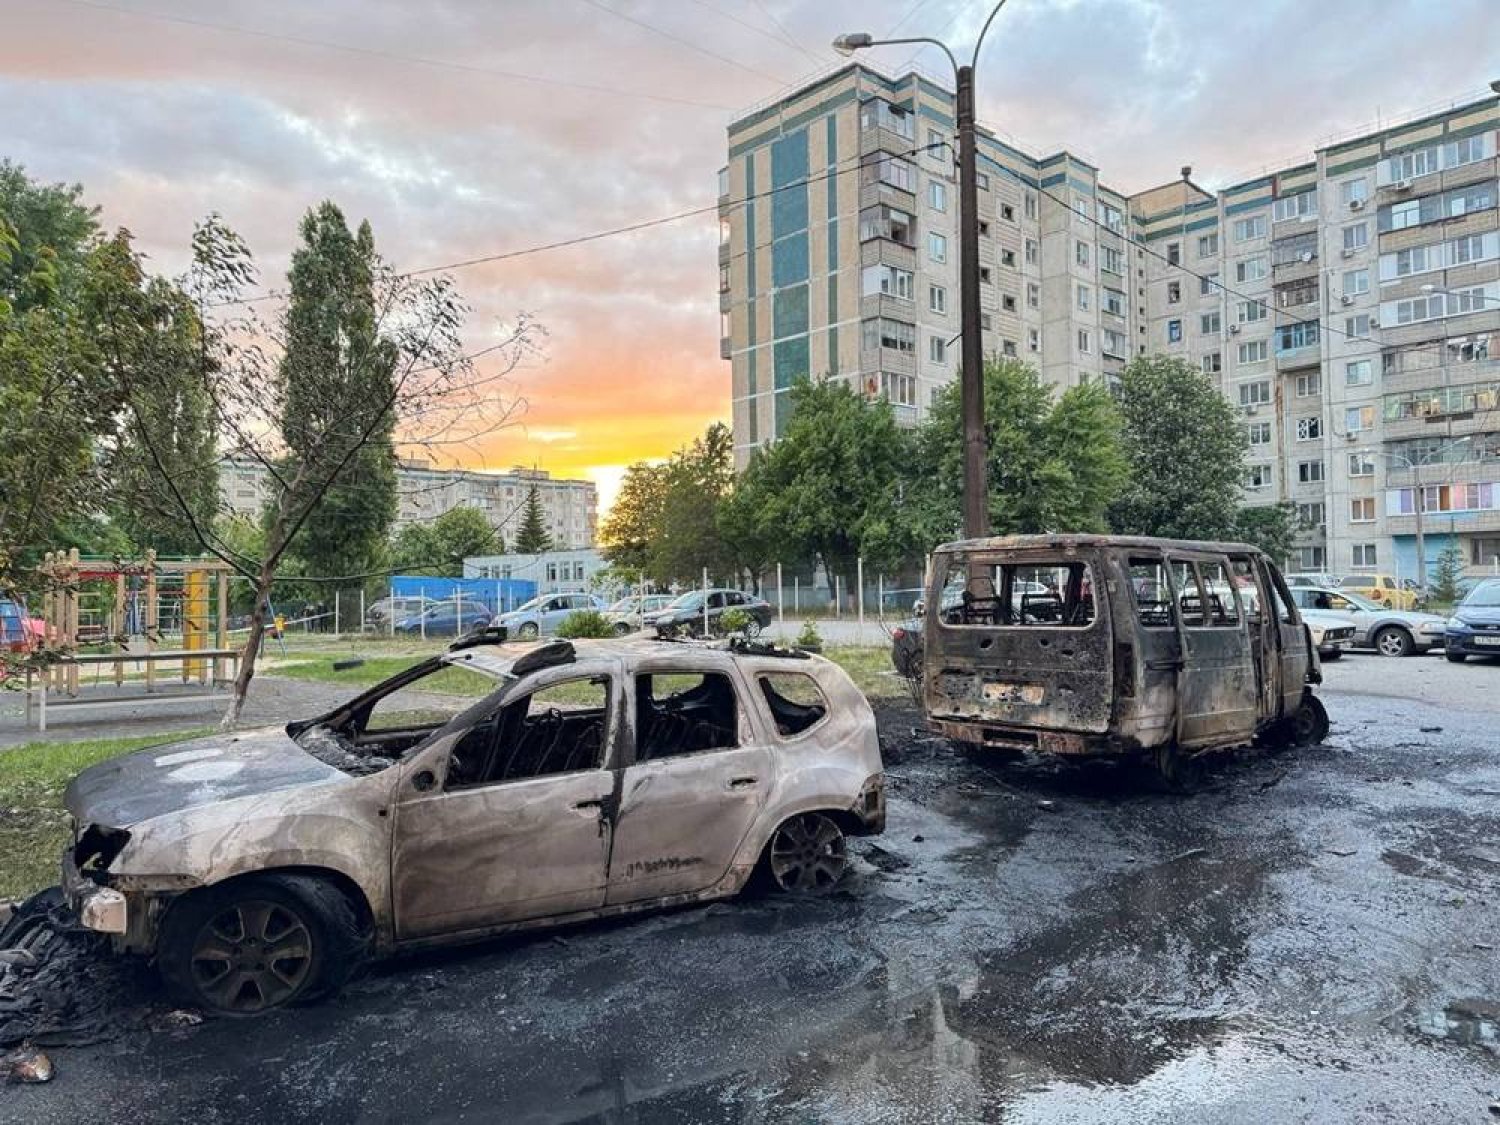 A view shows damaged vehicles at the site of a recent military strike, what local authorities called a Ukrainian air attack, in the course of the Russia-Ukraine conflict, in a location given as Belgorod, Russia, in this handout image released on May 11, 2024. (Governor of Russia's Belgorod Region Vyacheslav Gladkov via Telegram/Handout via Reuters) 